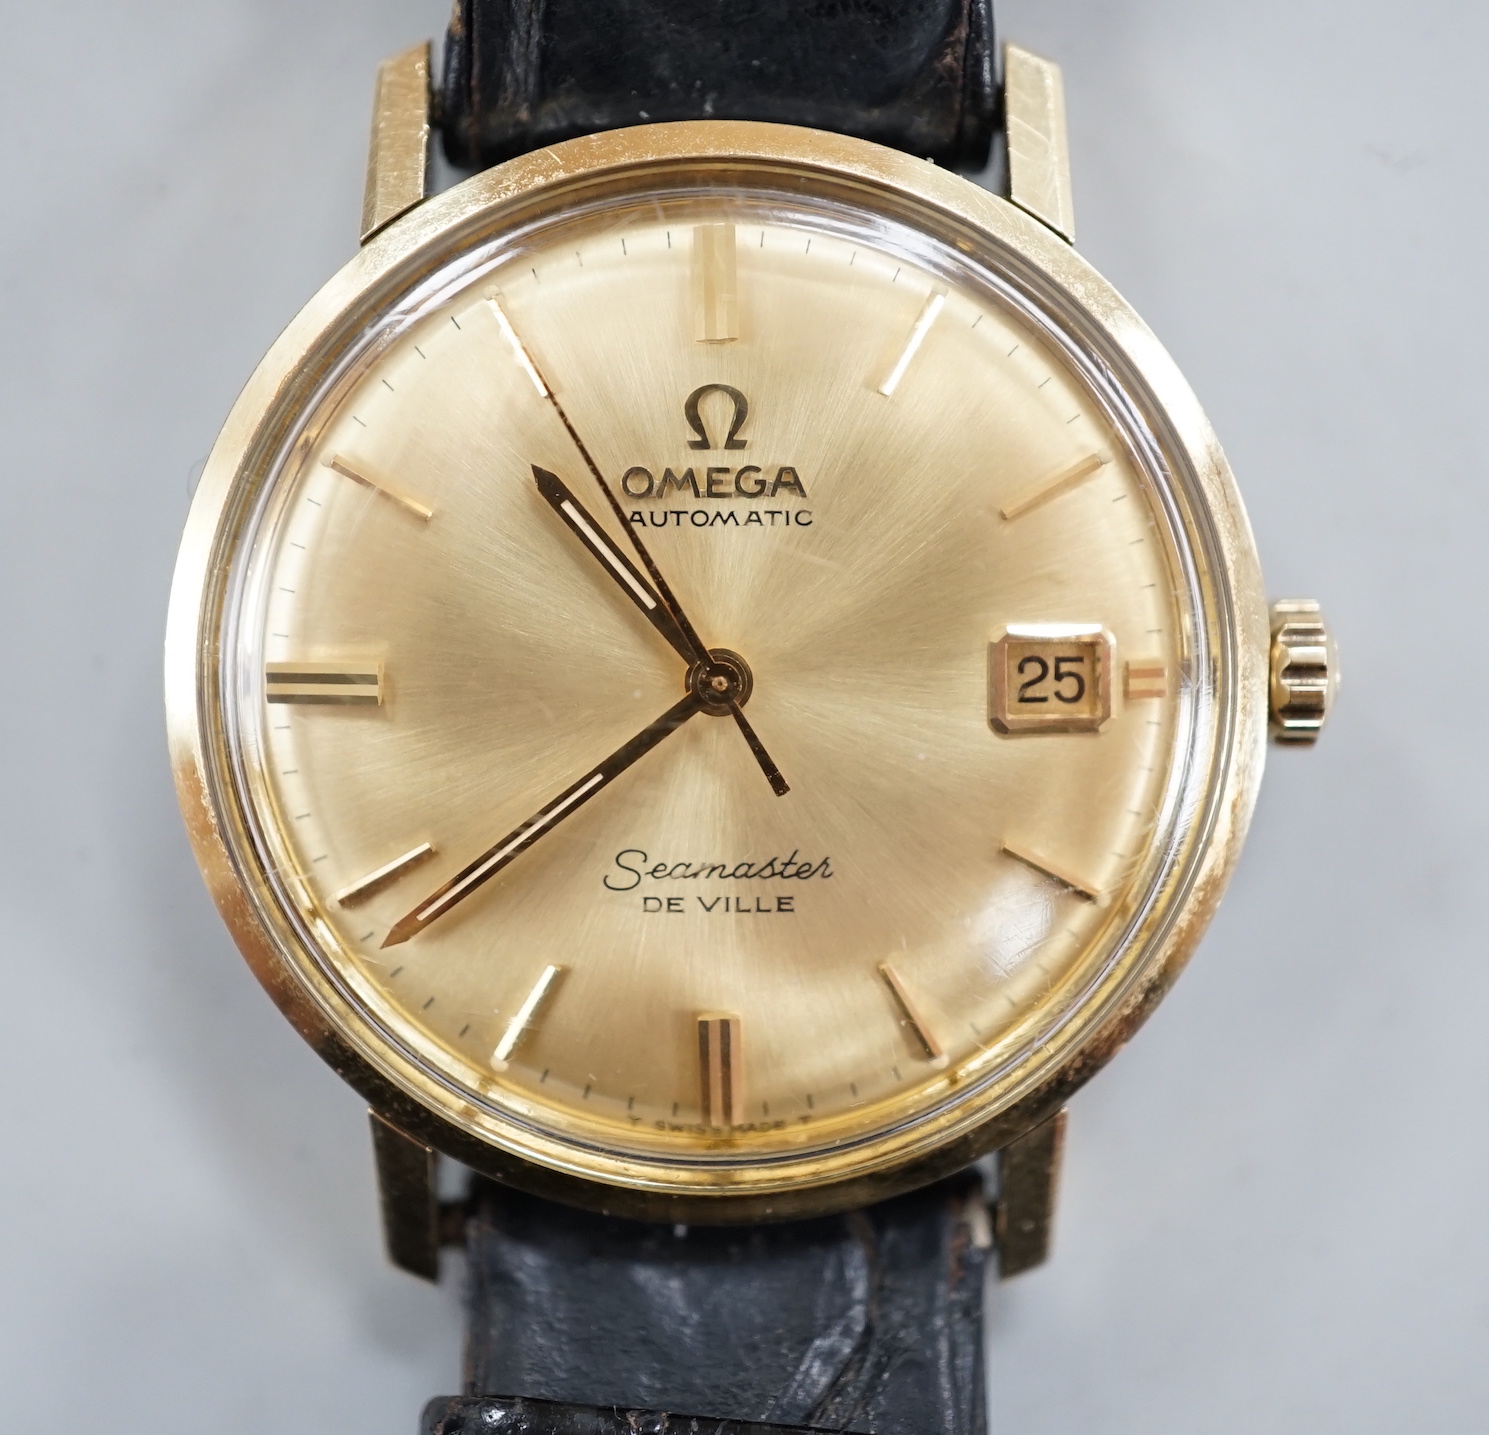 A gentleman's late 1970's steel and gold plated Omega Seamaster De Ville automatic wrist watch, with guarantee booklet, no box.